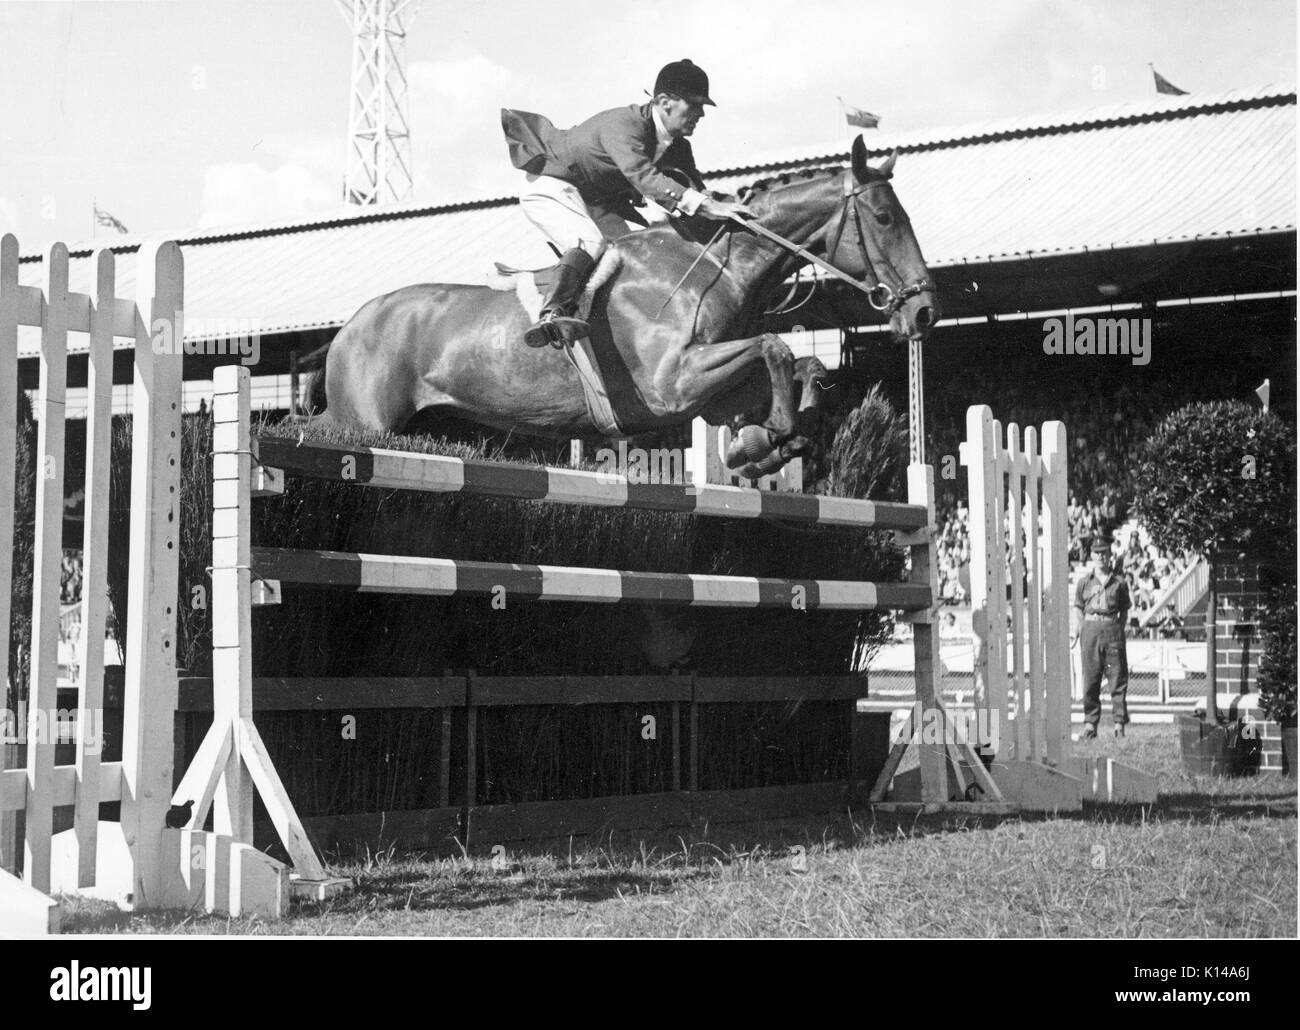 White City, London, 1949, Col. Harry Llewellyn (GBR) riding Foxhunter Stock Photo